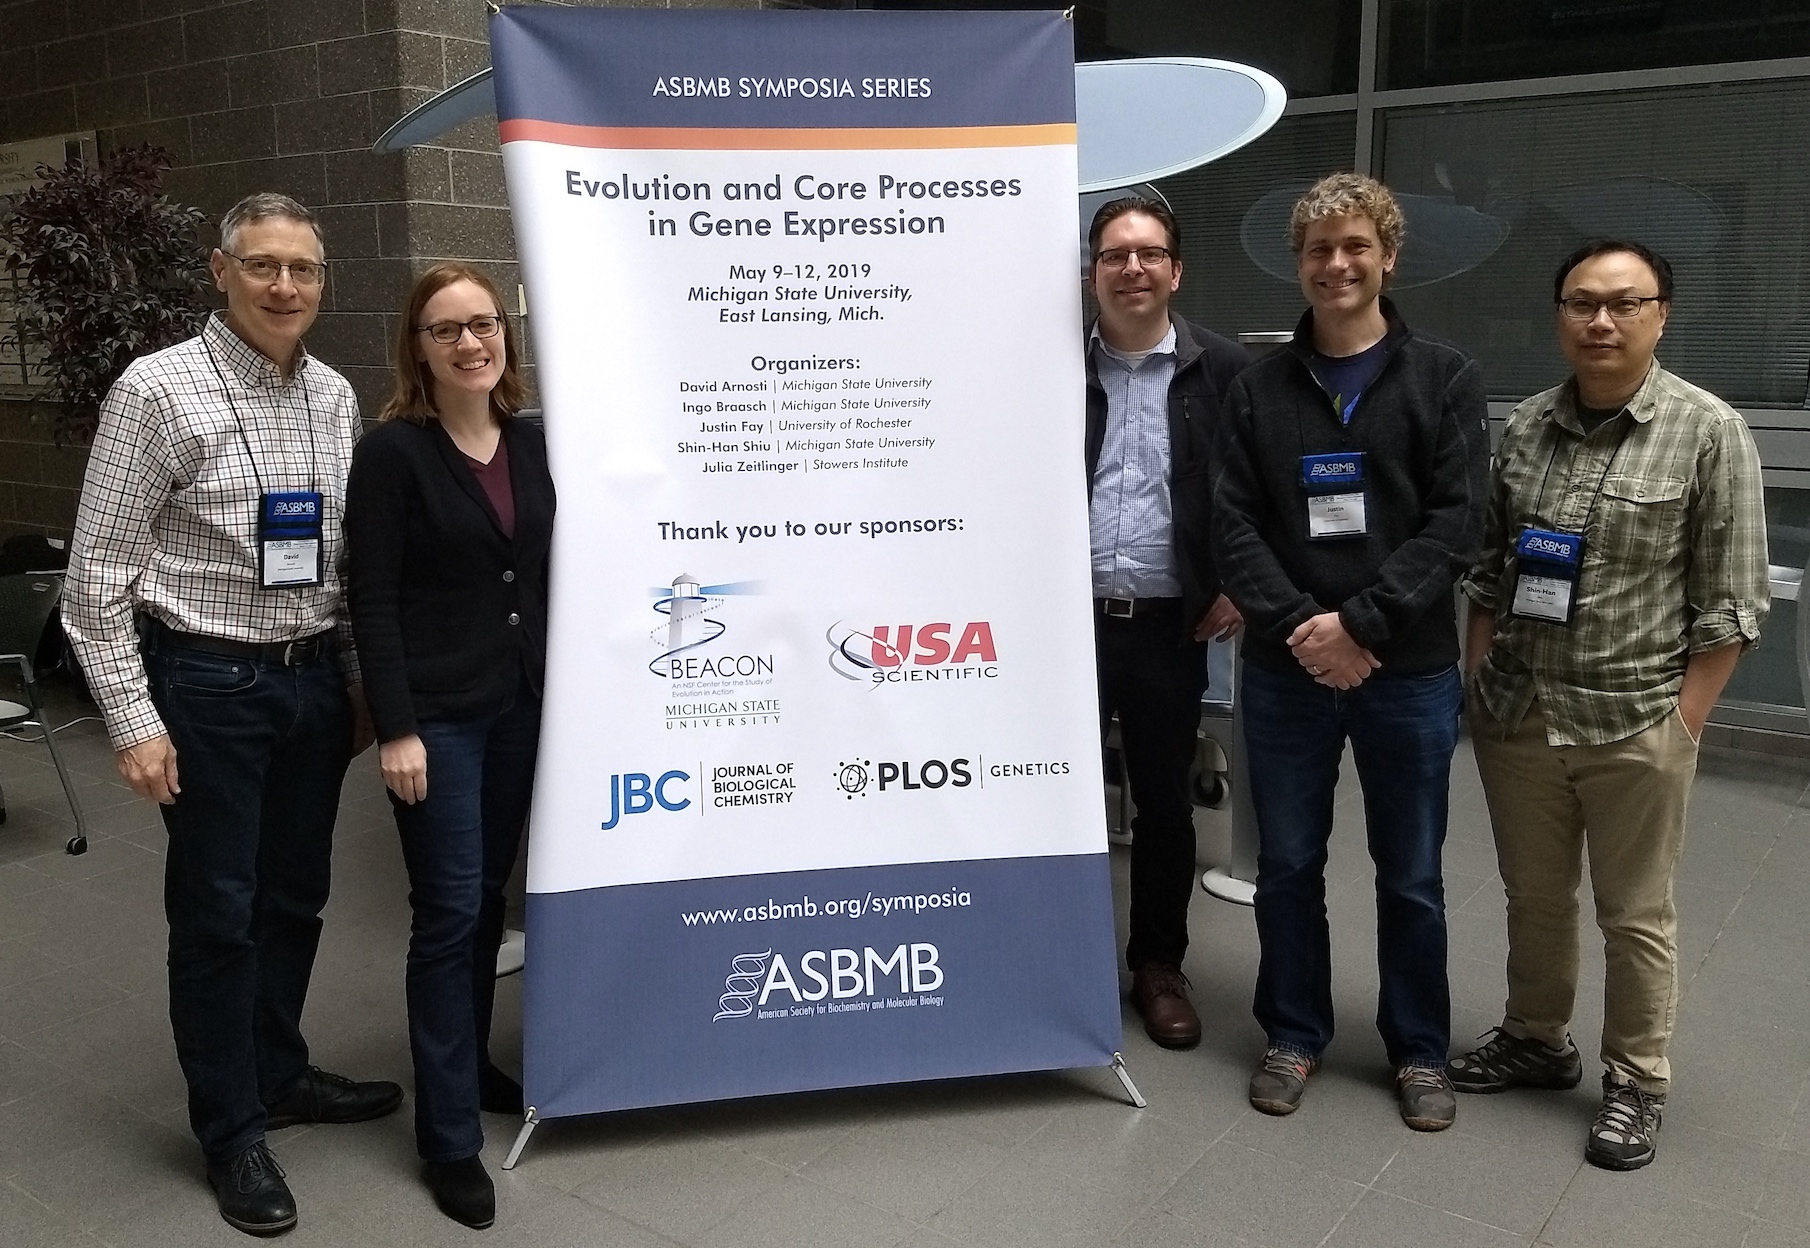 ASBMB Symposium on Evolution and Core Processes in Gene Expression